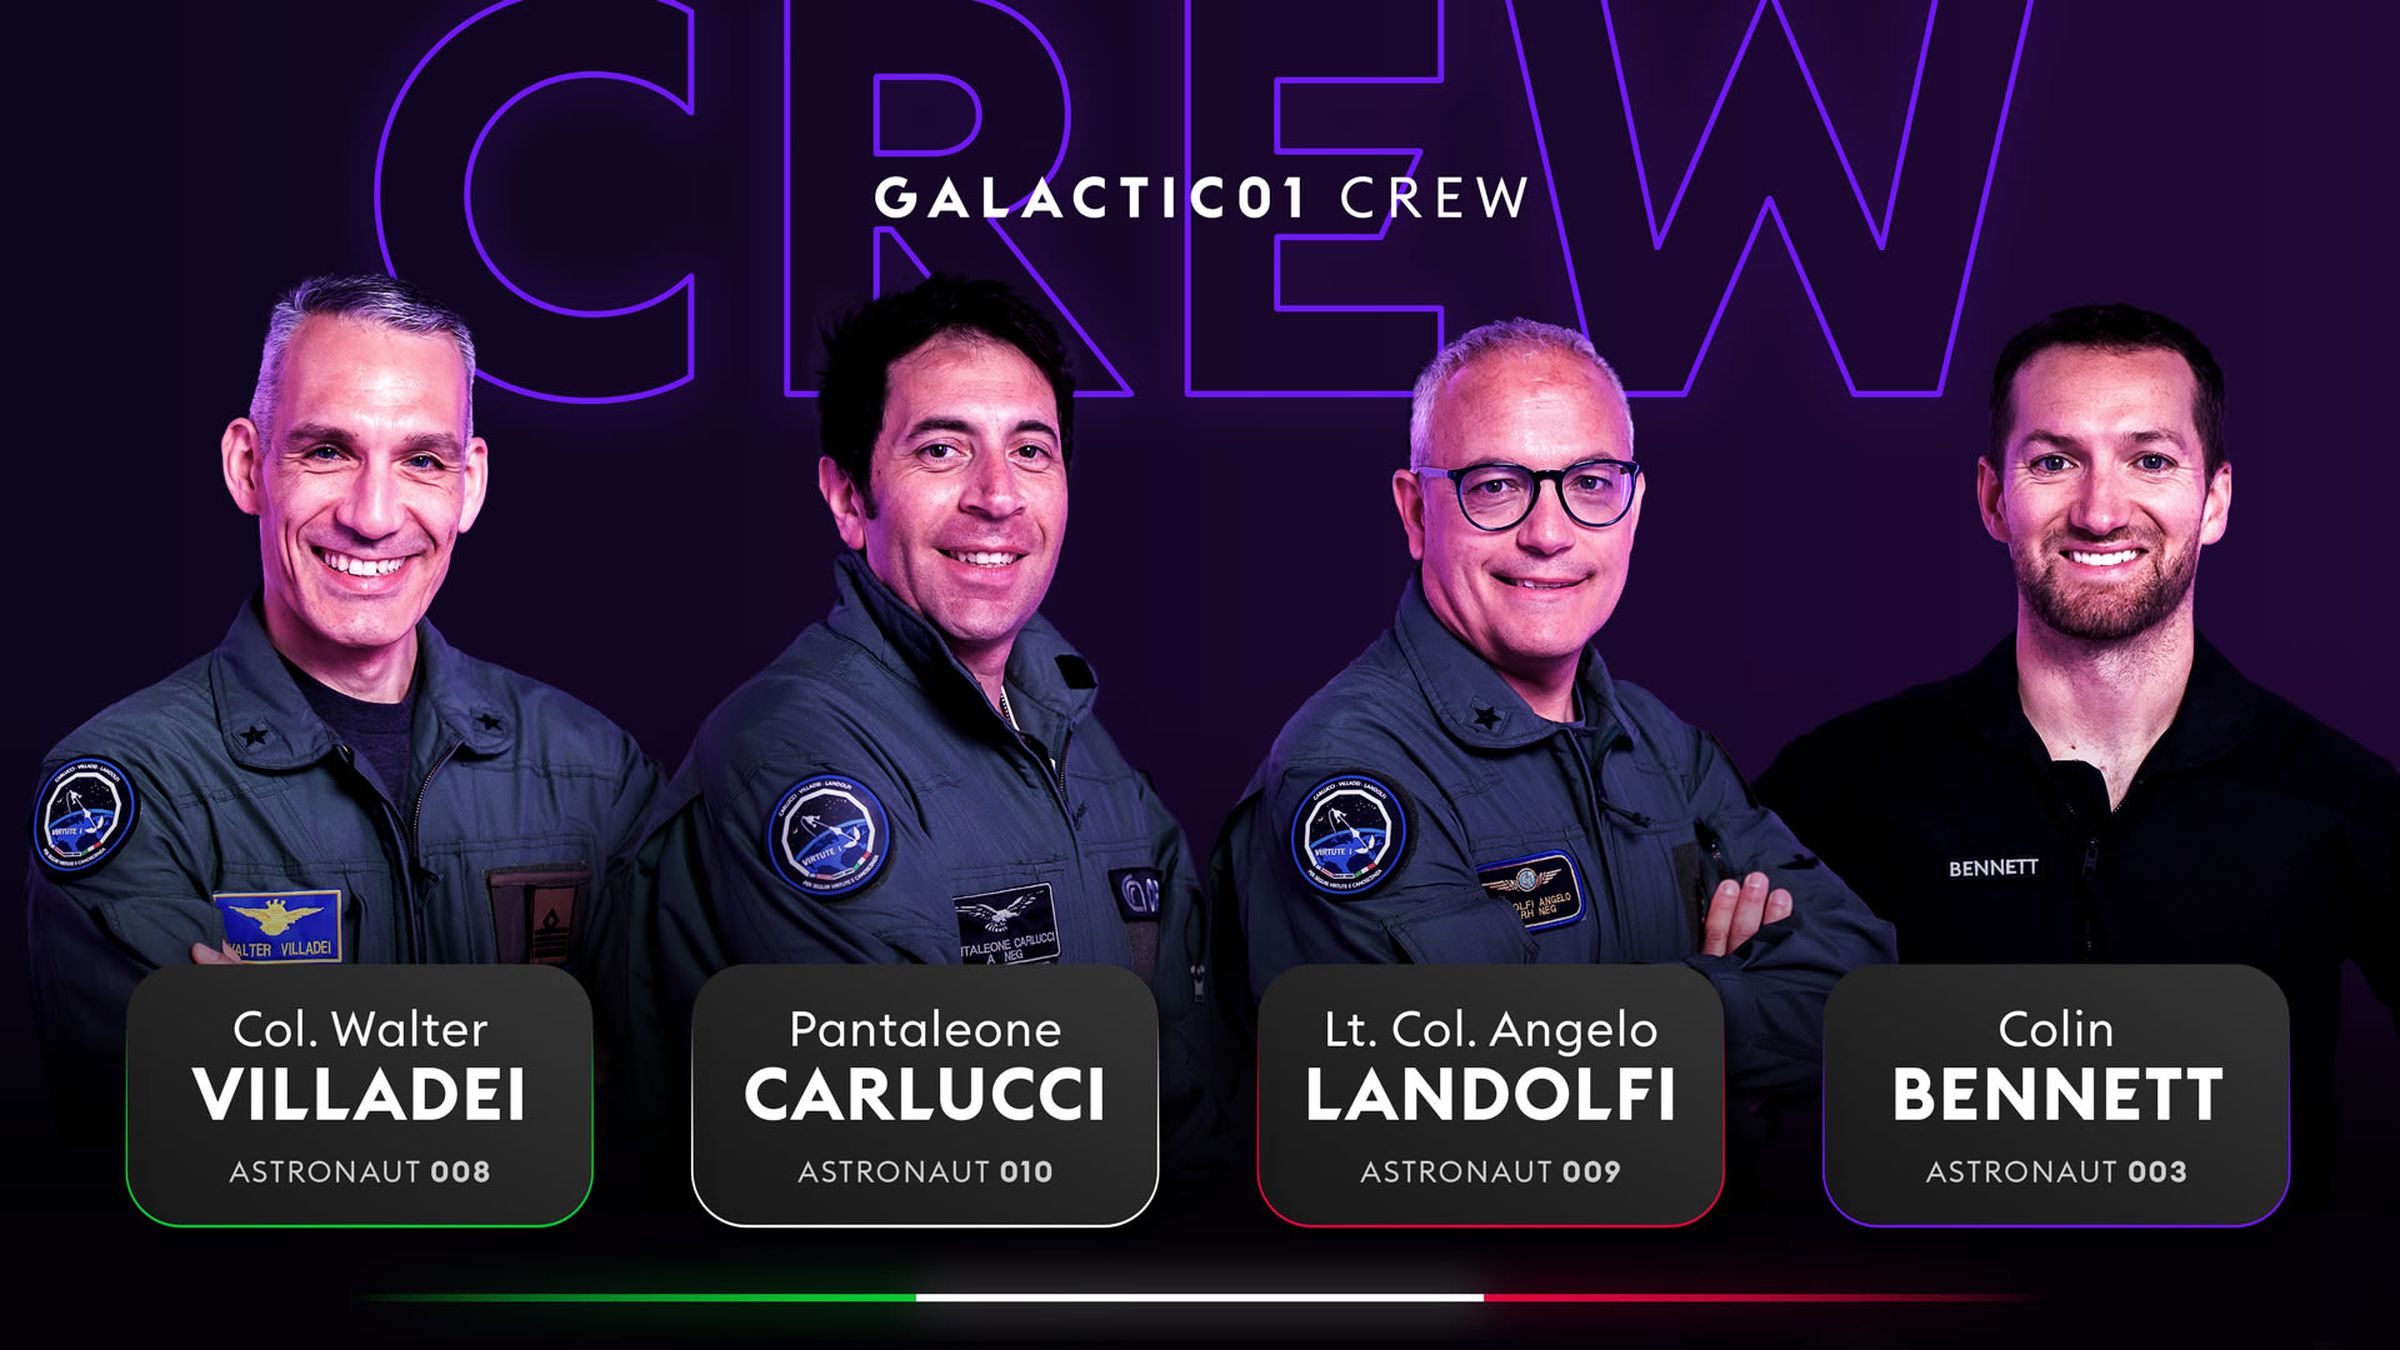 From left to right, Walter Villadei, Pantaleone Carlucci, Angelo Landolfi, and Colin Bennett in a press image for the Virgin Galactic 01 mission.